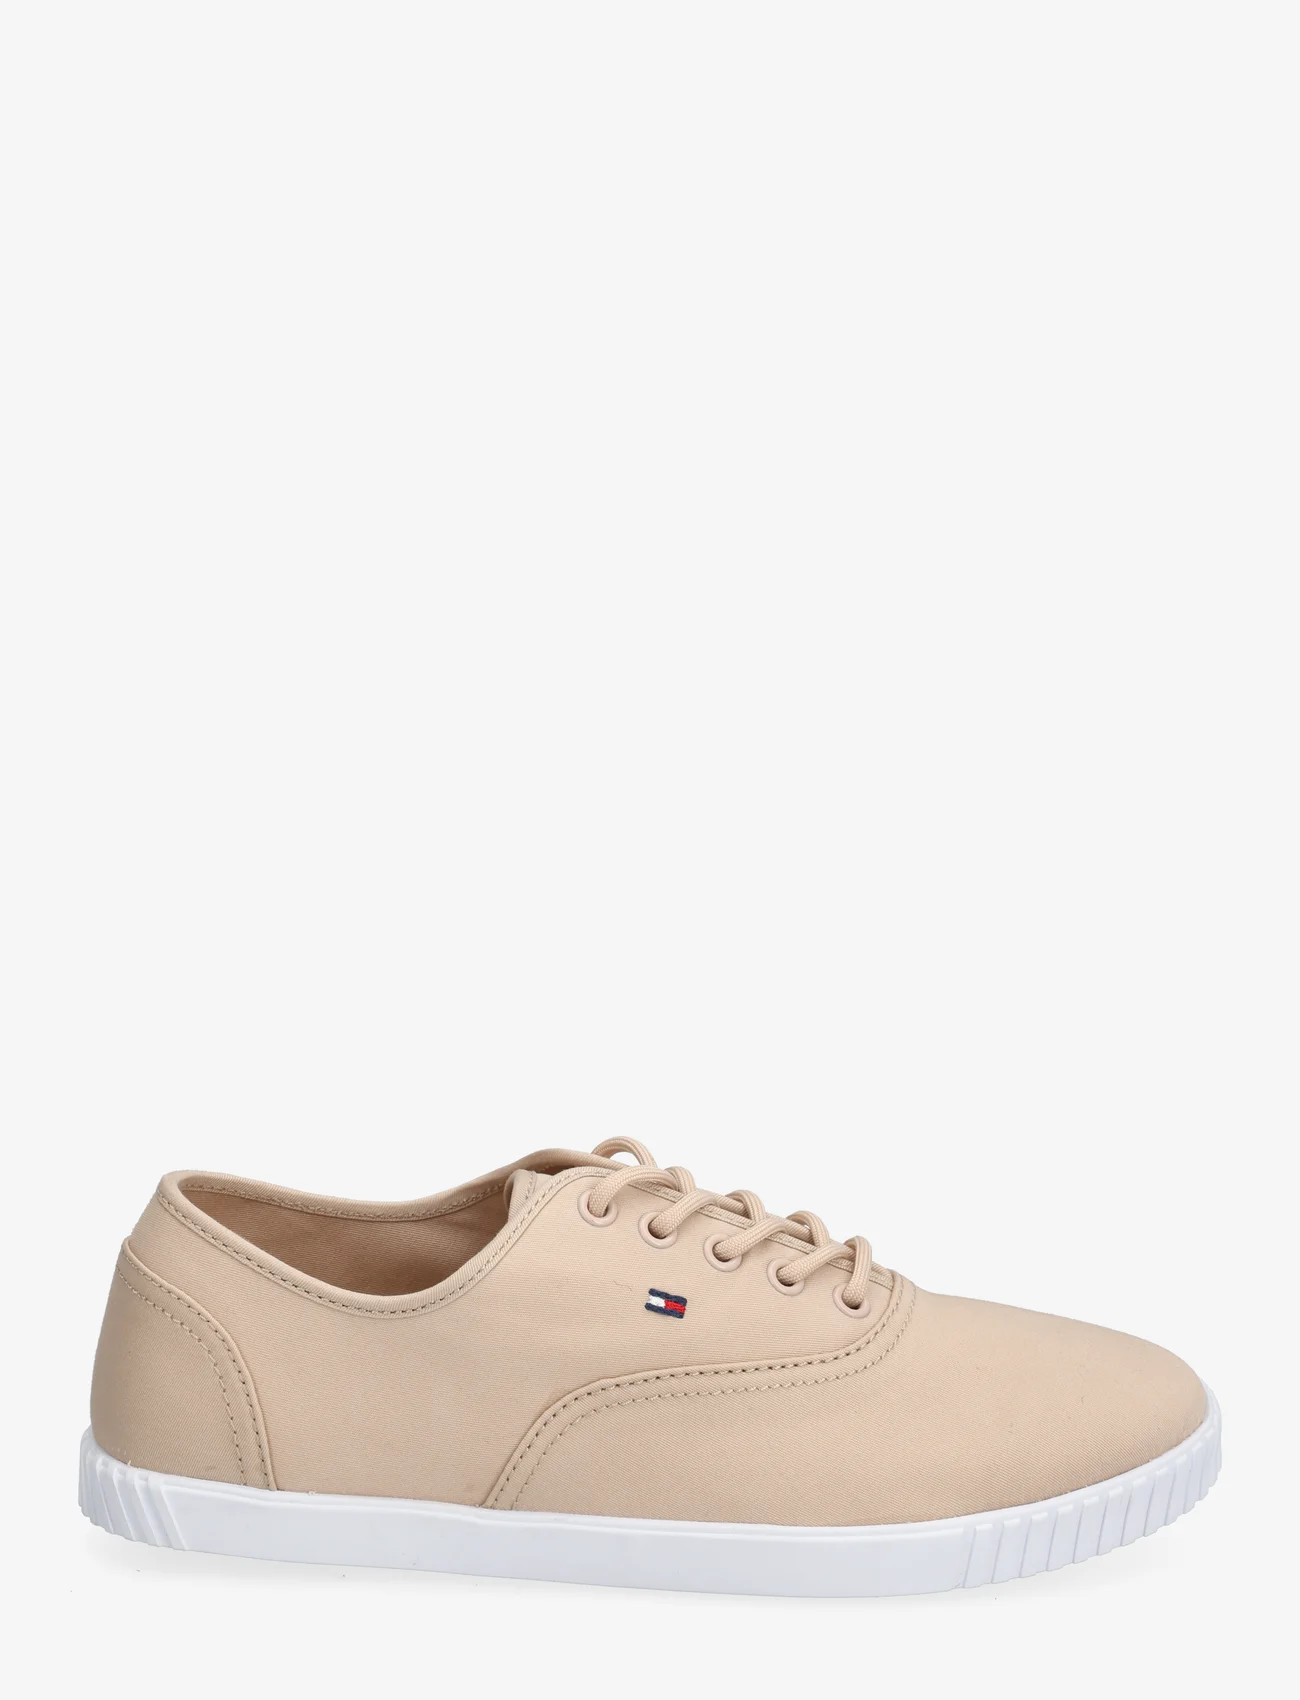 Tommy Hilfiger - CANVAS LACE UP SNEAKER - sneakers - misty blush - 1